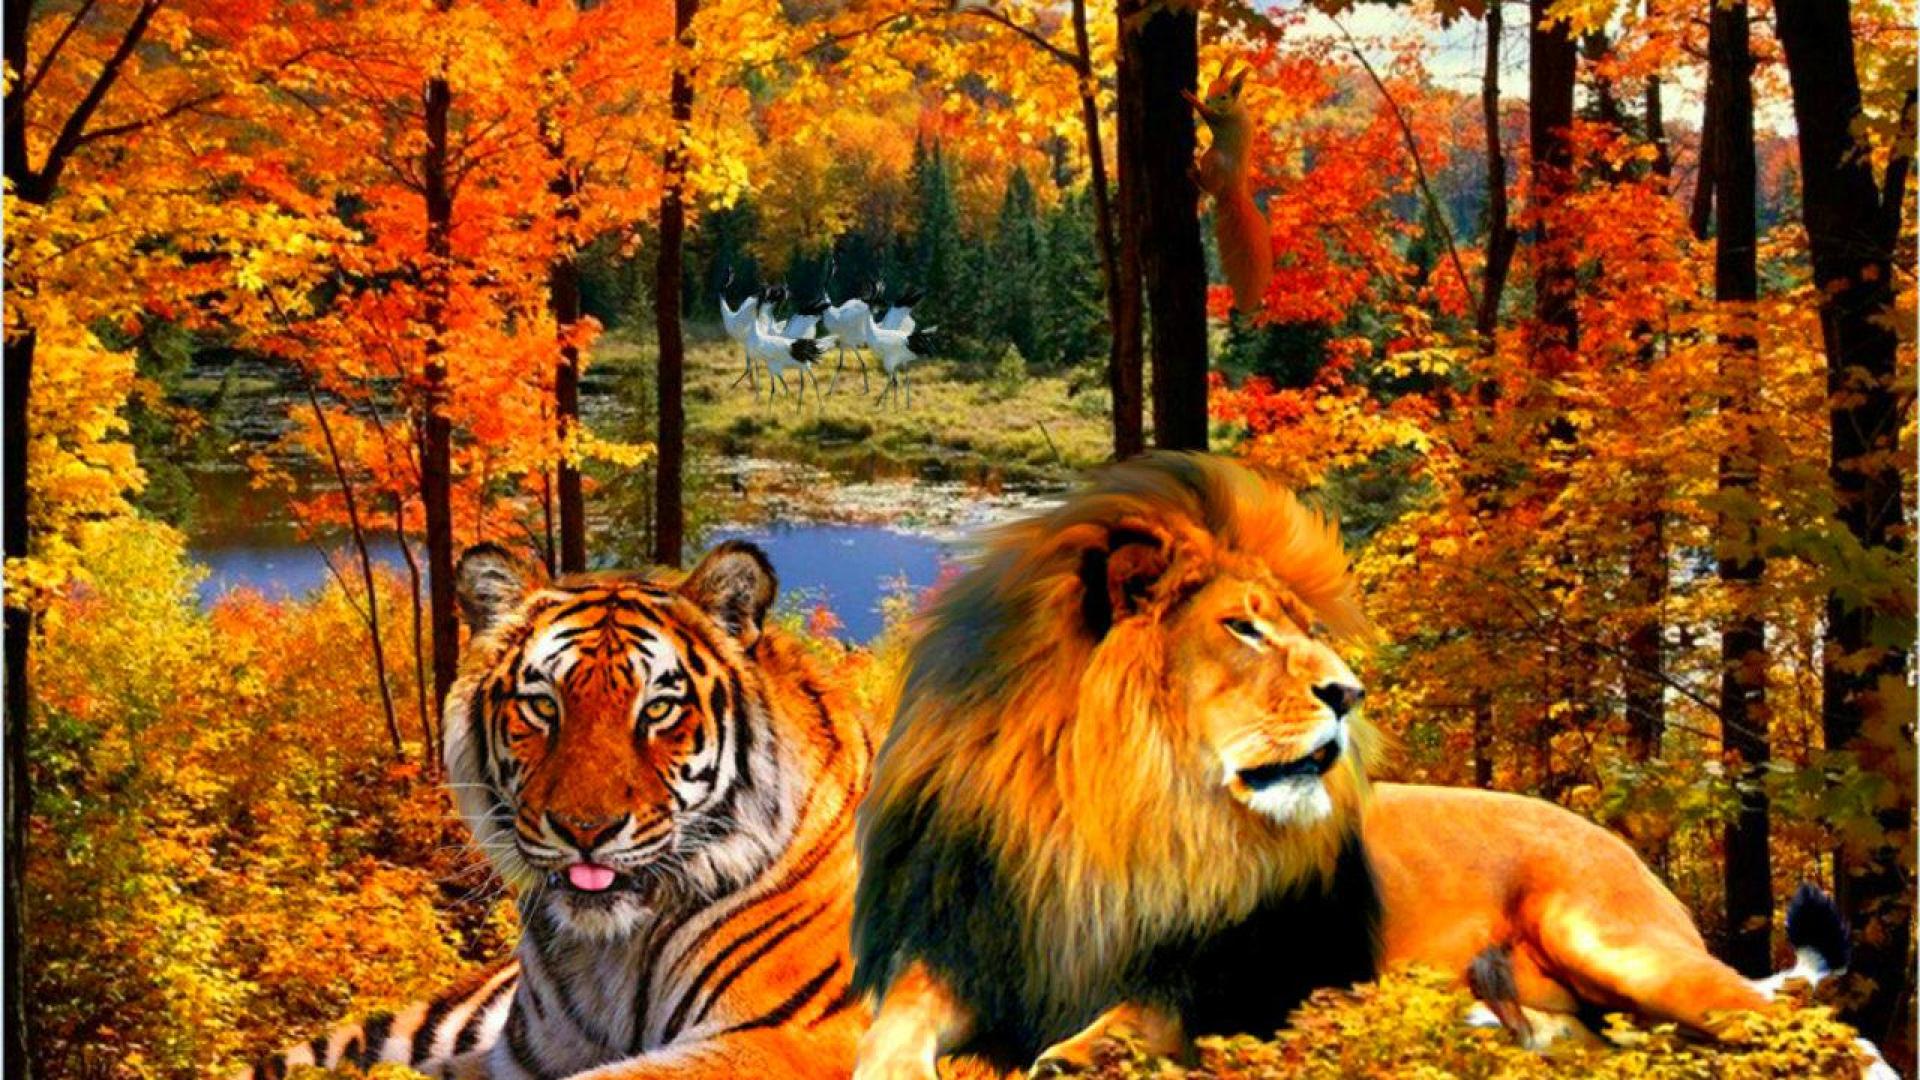 Lion and tiger - - High Quality and Resolution